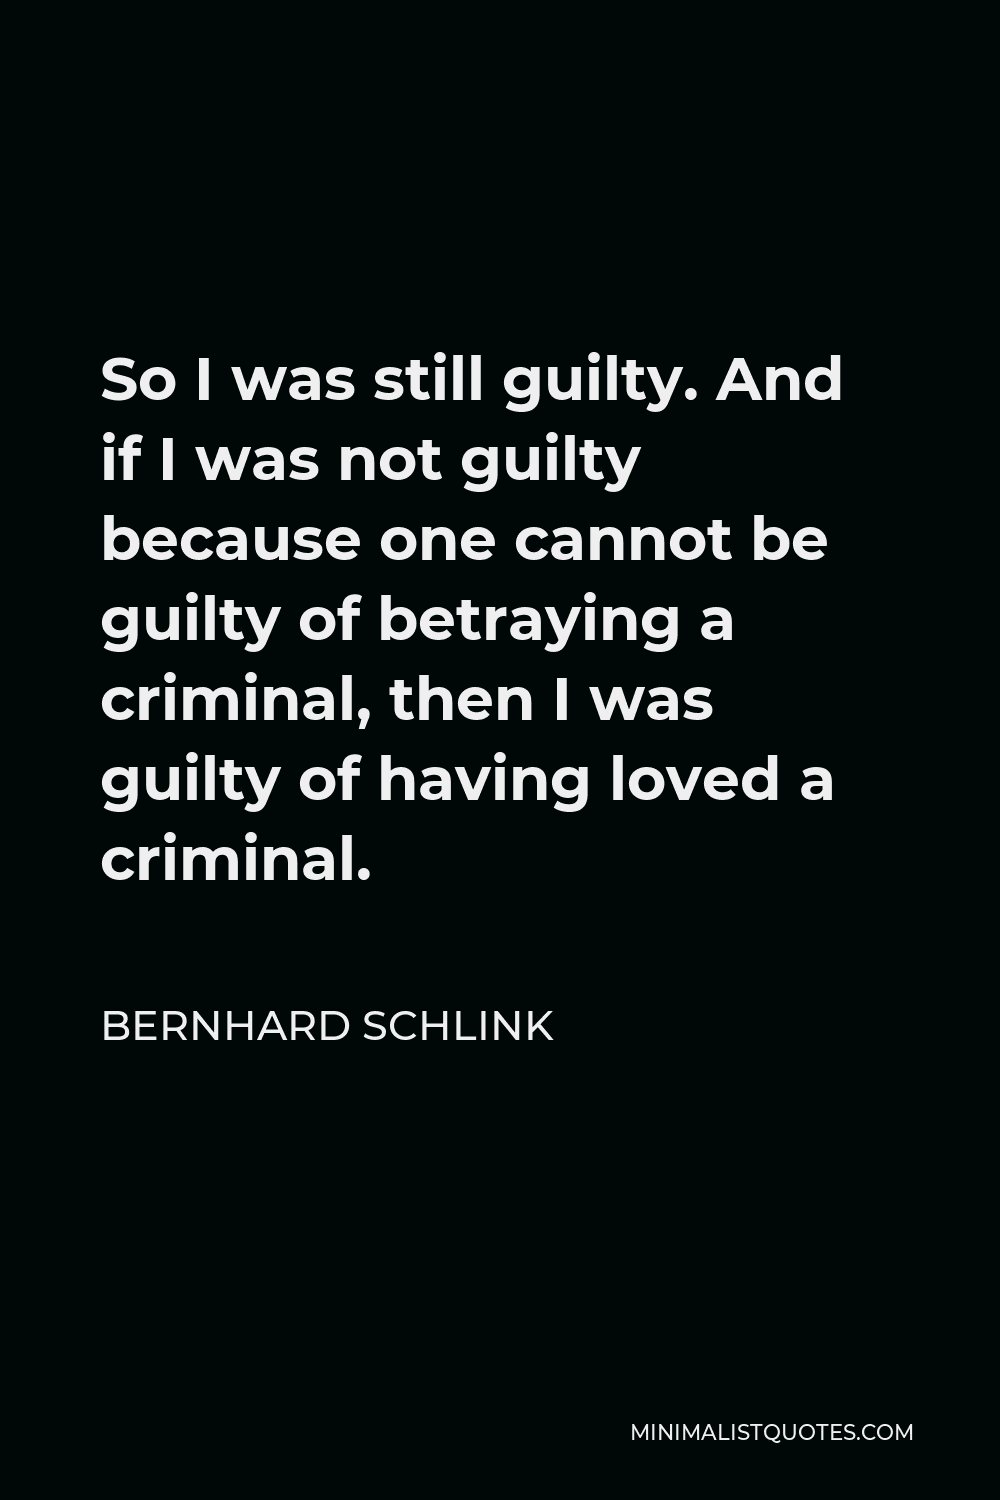 Bernhard Schlink Quote - So I was still guilty. And if I was not guilty because one cannot be guilty of betraying a criminal, then I was guilty of having loved a criminal.